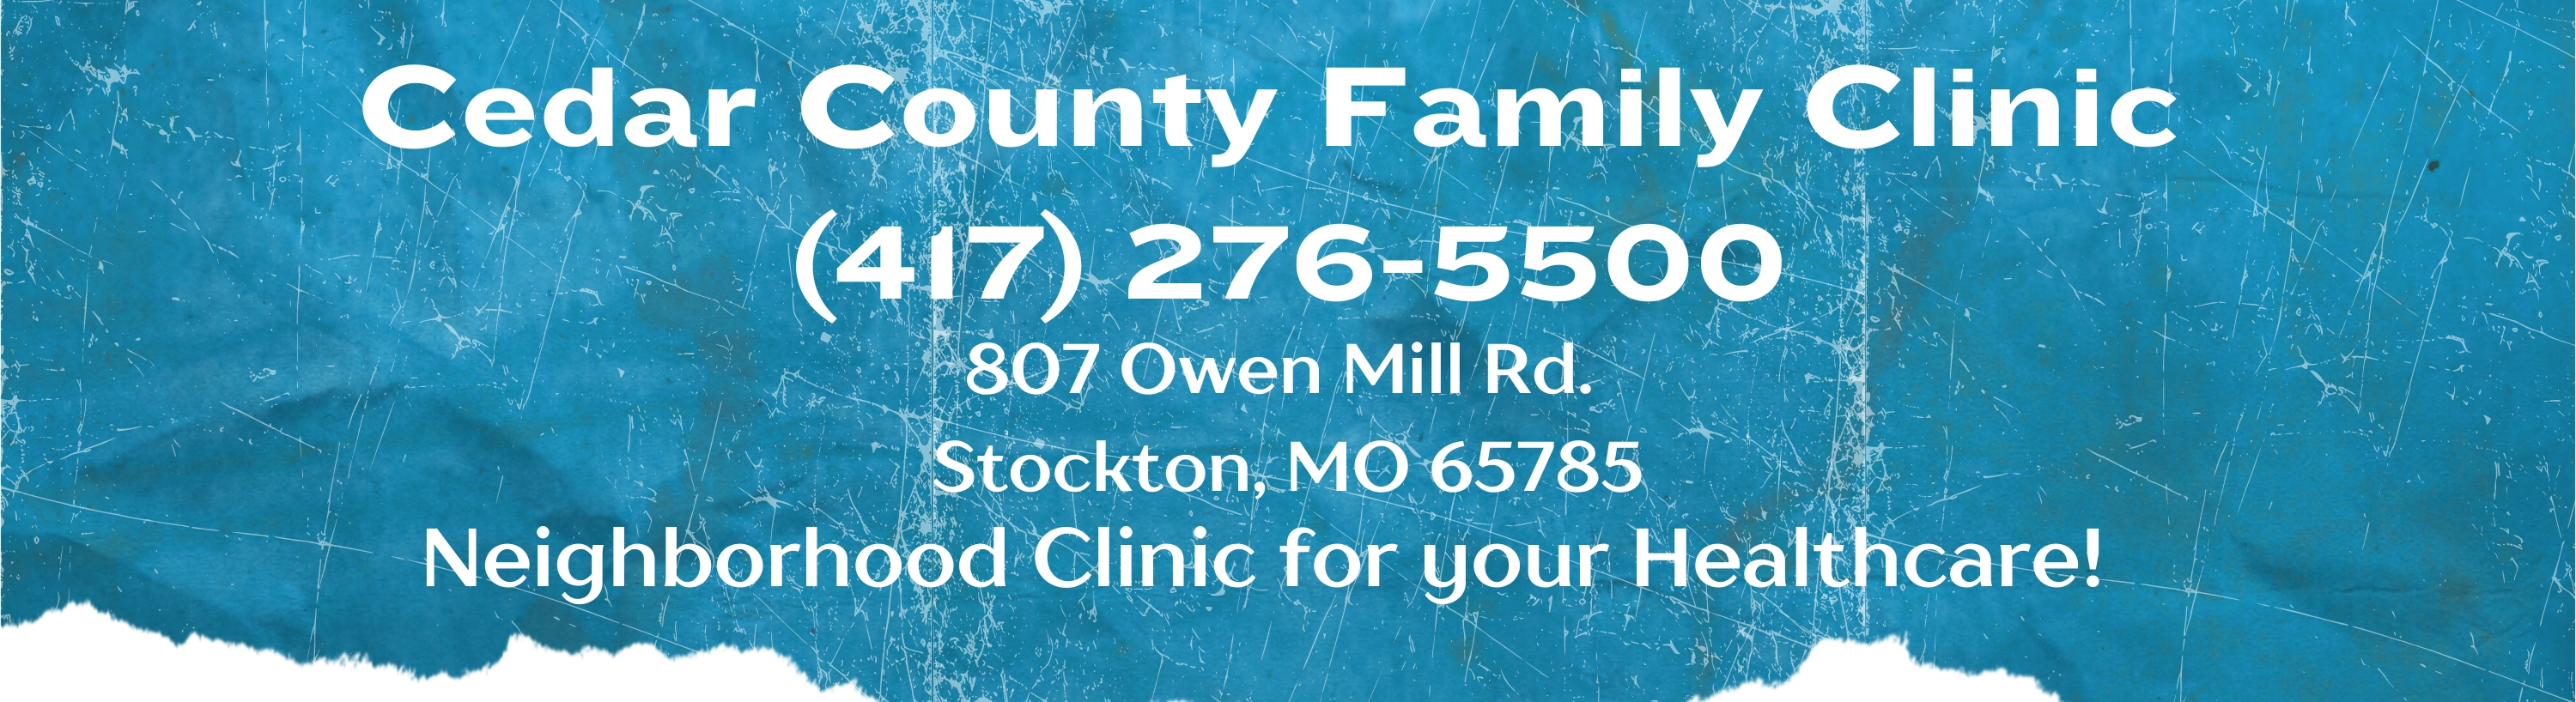 Cedar County Family Clinic
Now Open
Call (417)276-5500 for an appointment. 

Pictured is the building for the Family Clinic along with Patricia Myers, M.D., James Patton, PA-C.